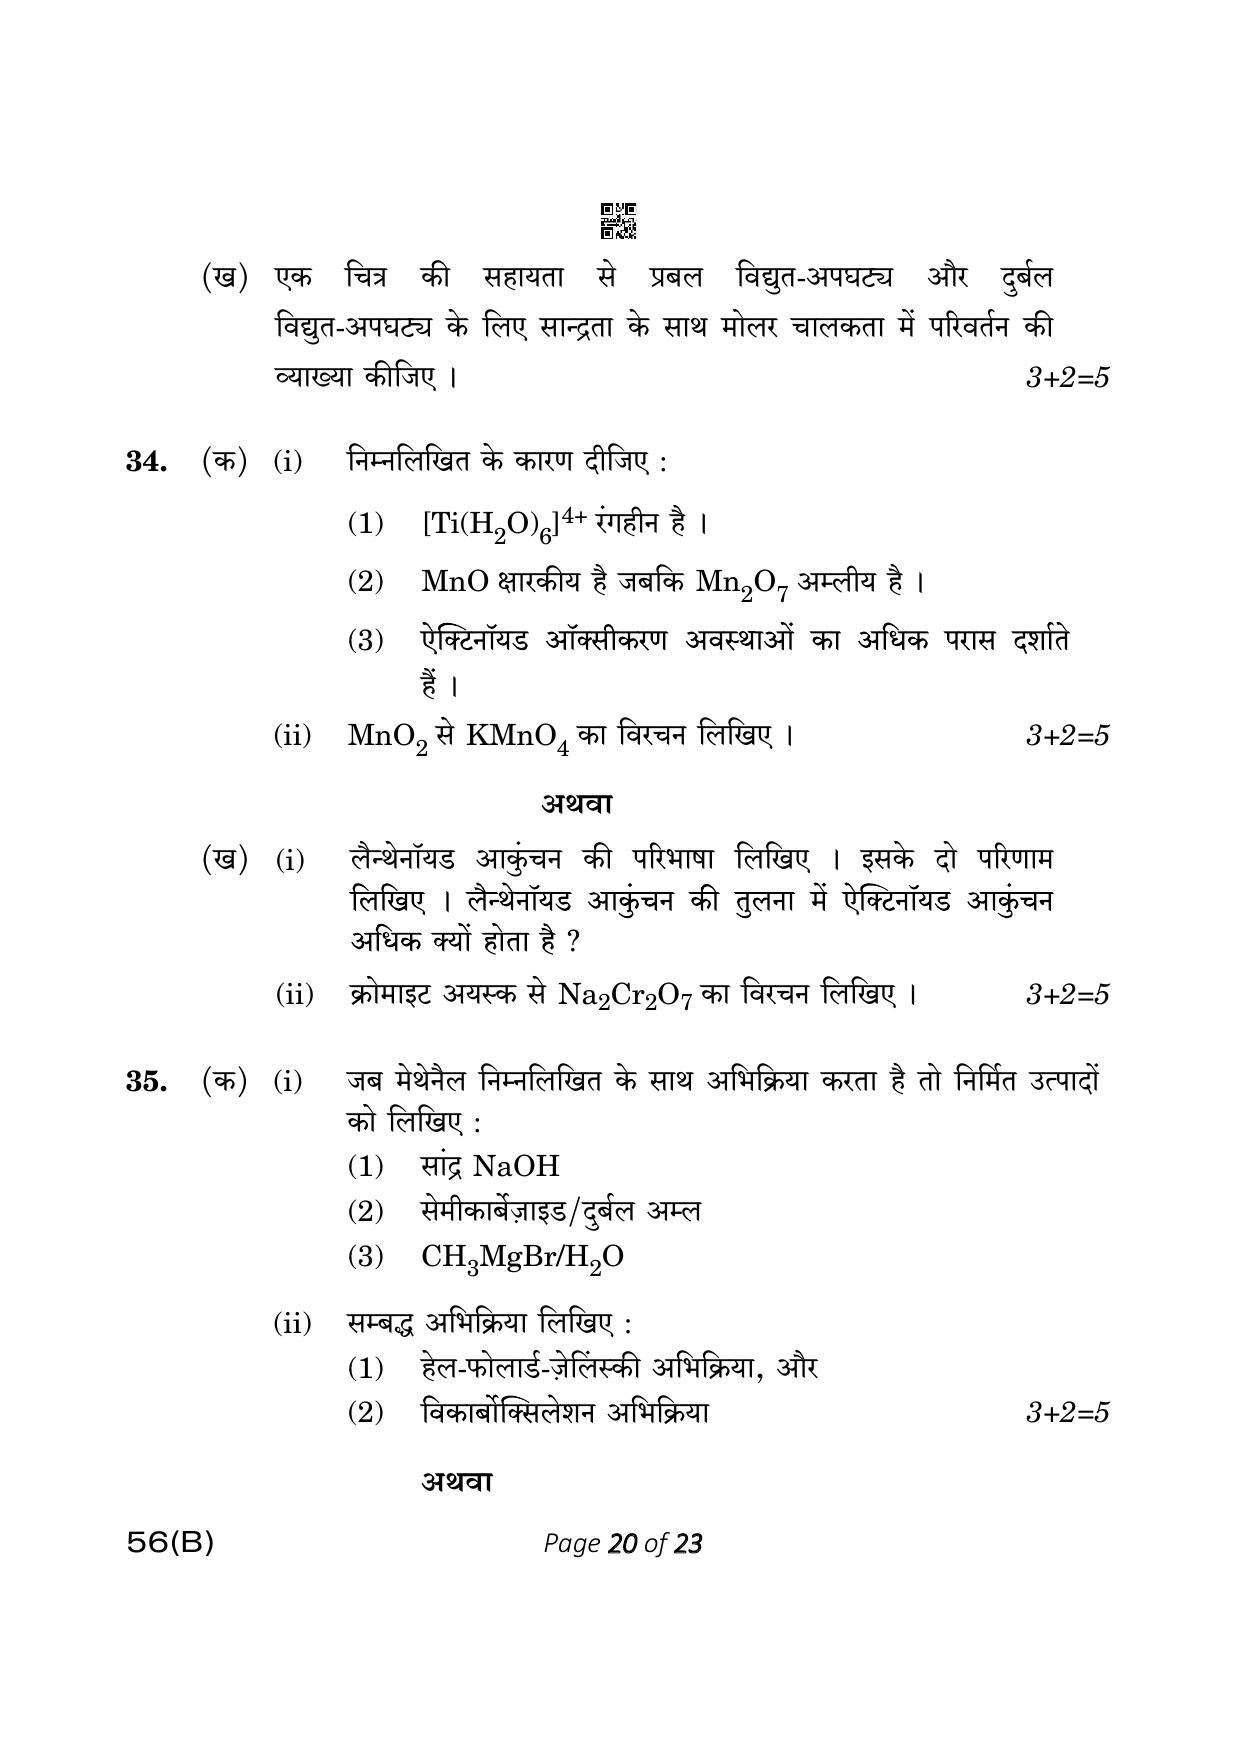 CBSE Class 12 56-B Chemistry 2023 (Compartment) Question Paper - Page 20